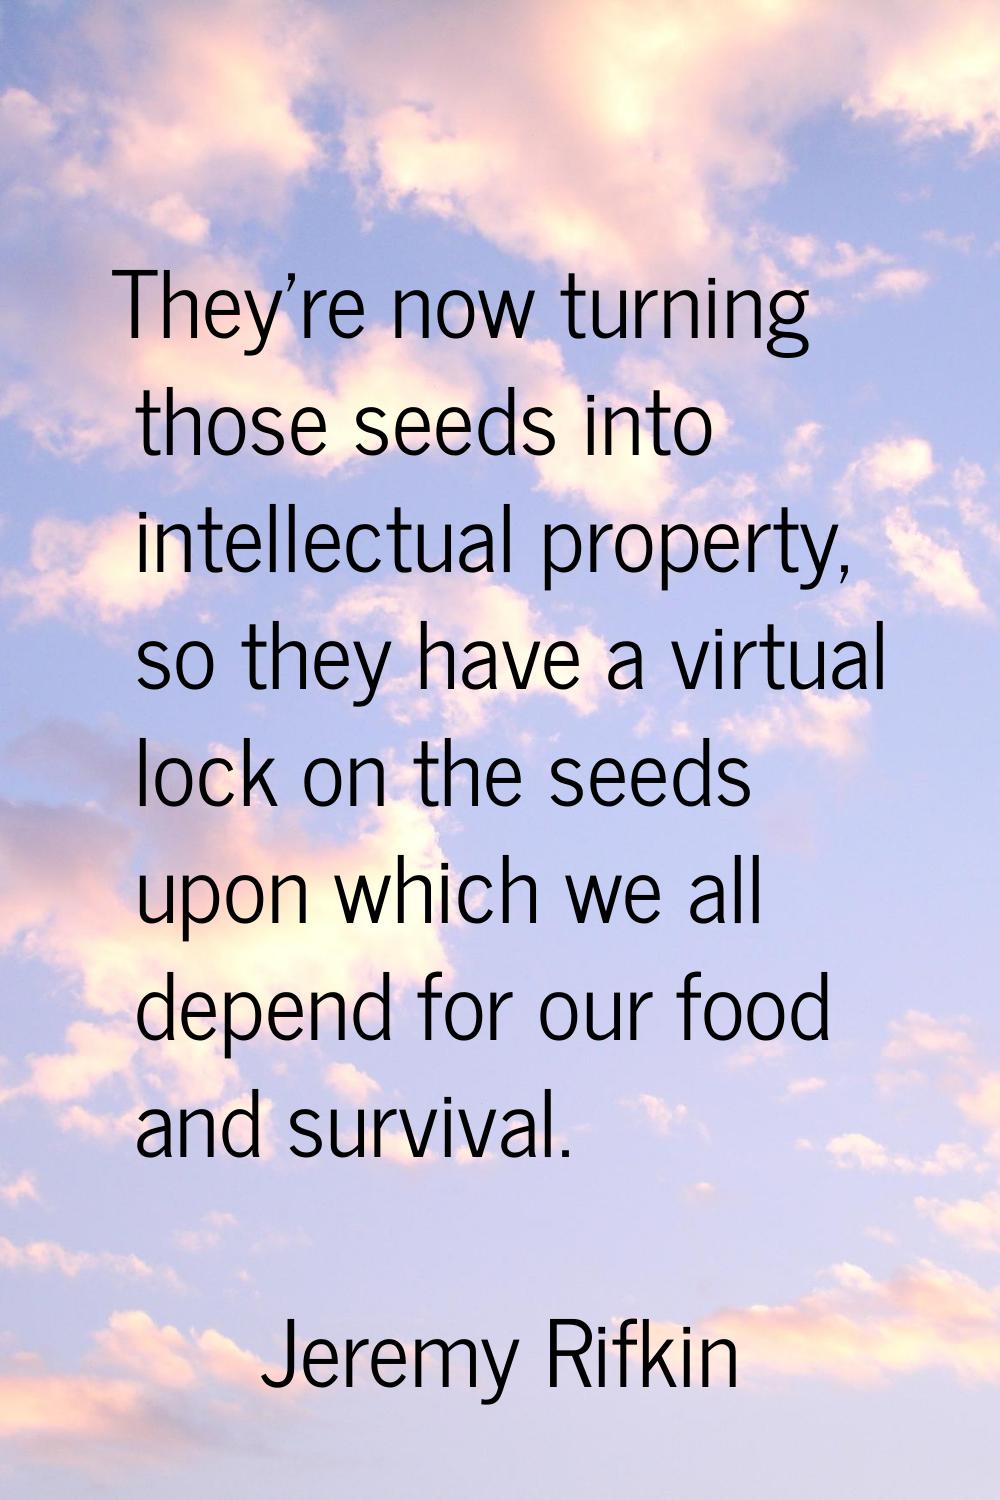 They're now turning those seeds into intellectual property, so they have a virtual lock on the seed